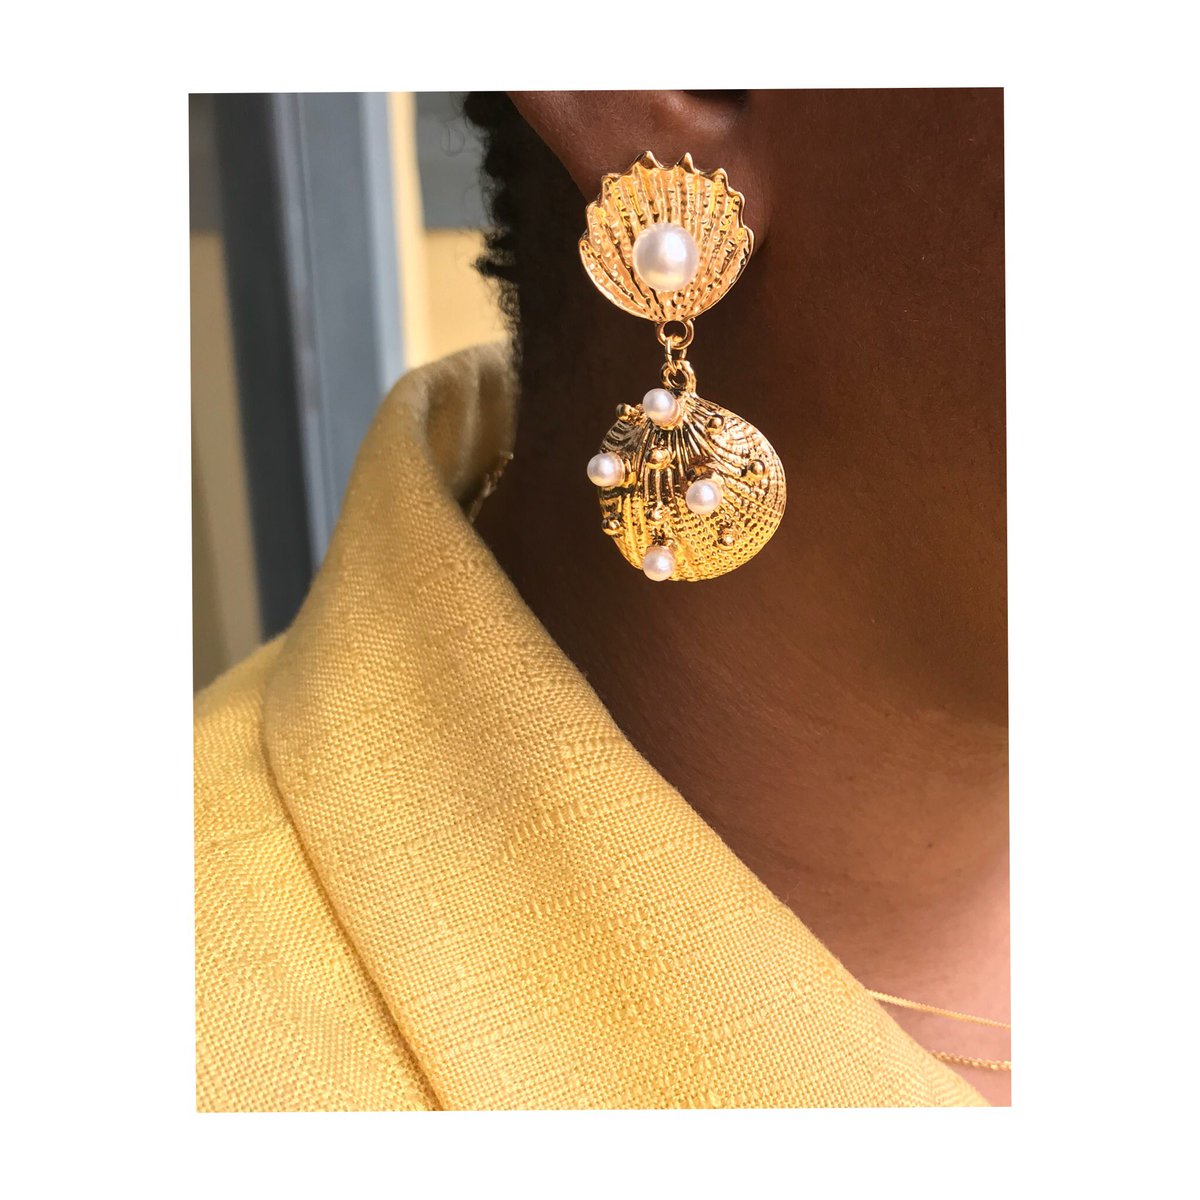 Why should you be regular when your earring isn’t.

We’ve limited pieces of this earring. Payment validates order. 
Price:N3500

Place your order now via Dm or WhatsApp 09083959501.

#abstract #minimalistfashion #metalsbyolga #affordablefashion #accessories #earrings #olgadiva